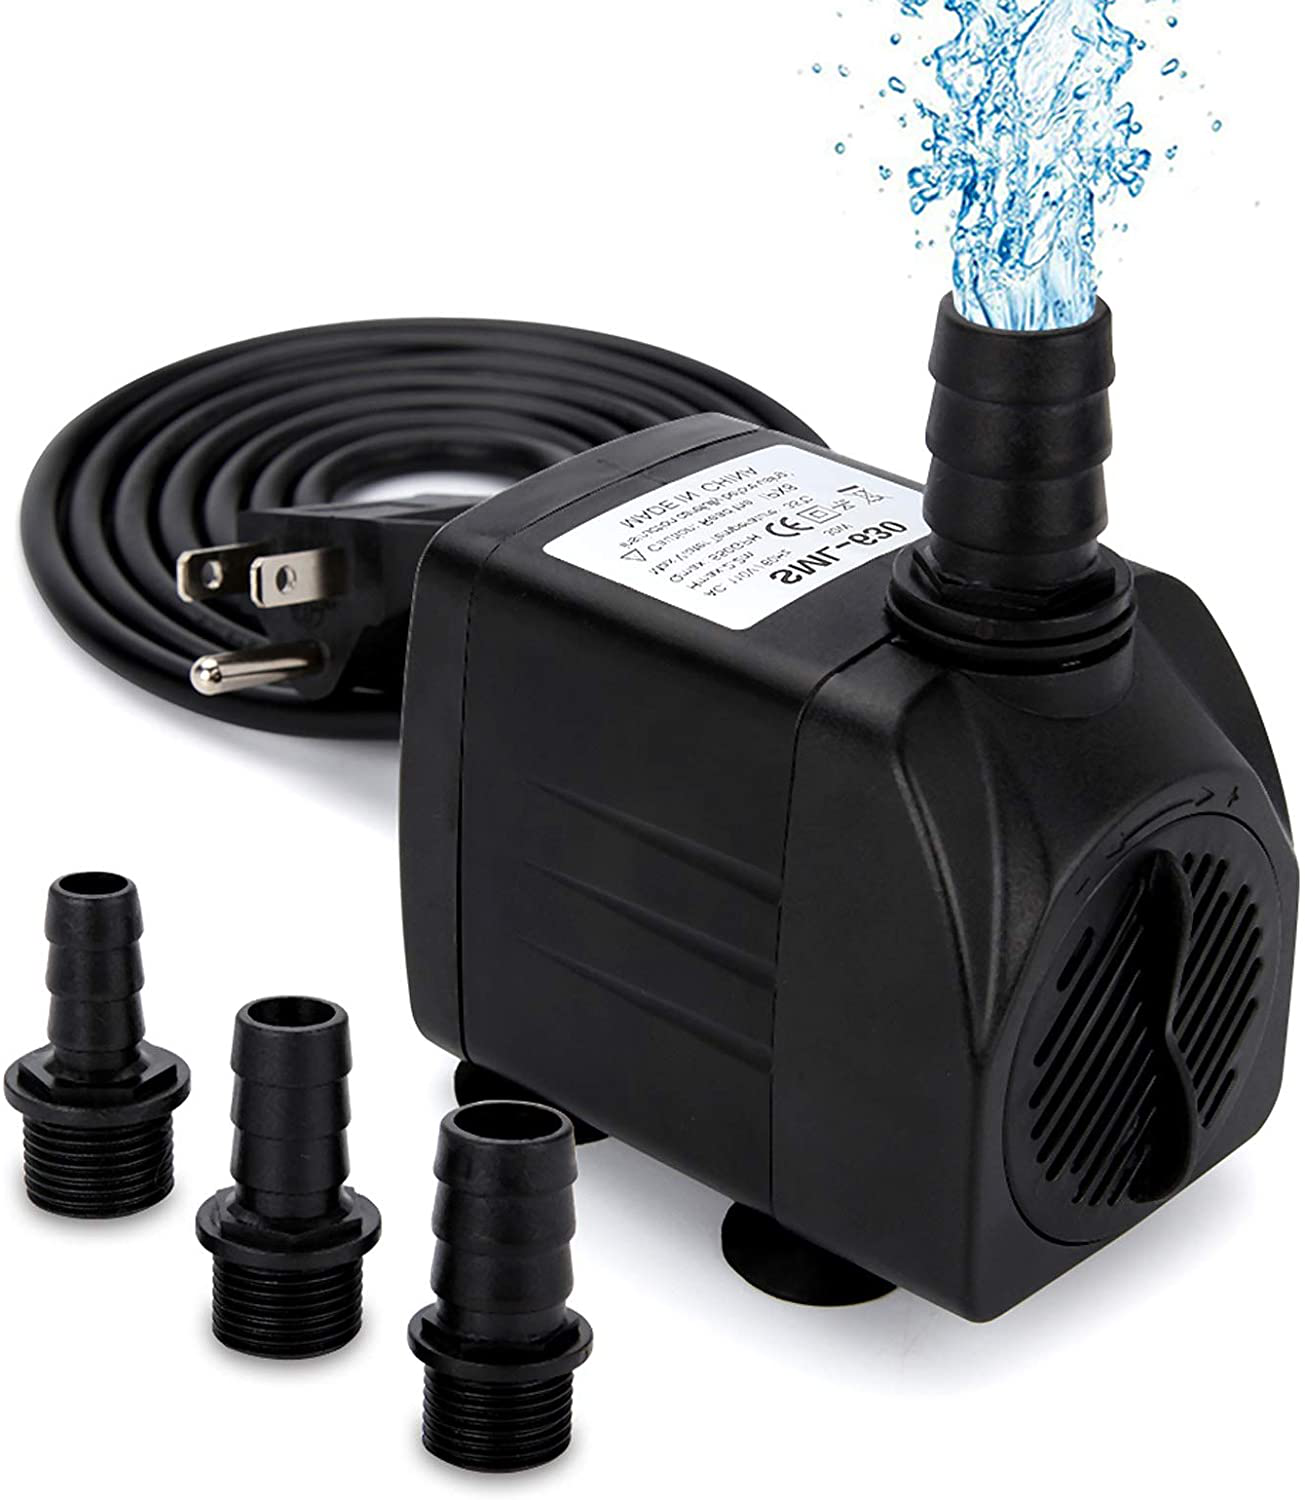 GROWNEER 550GPH Submersible Pump 30W Ultra Quiet Fountain Water Pump, 2000L/H, with 7.2Ft High Lift, 3 Nozzles for Aquarium, Fish Tank, Pond, Hydroponics, Statuary